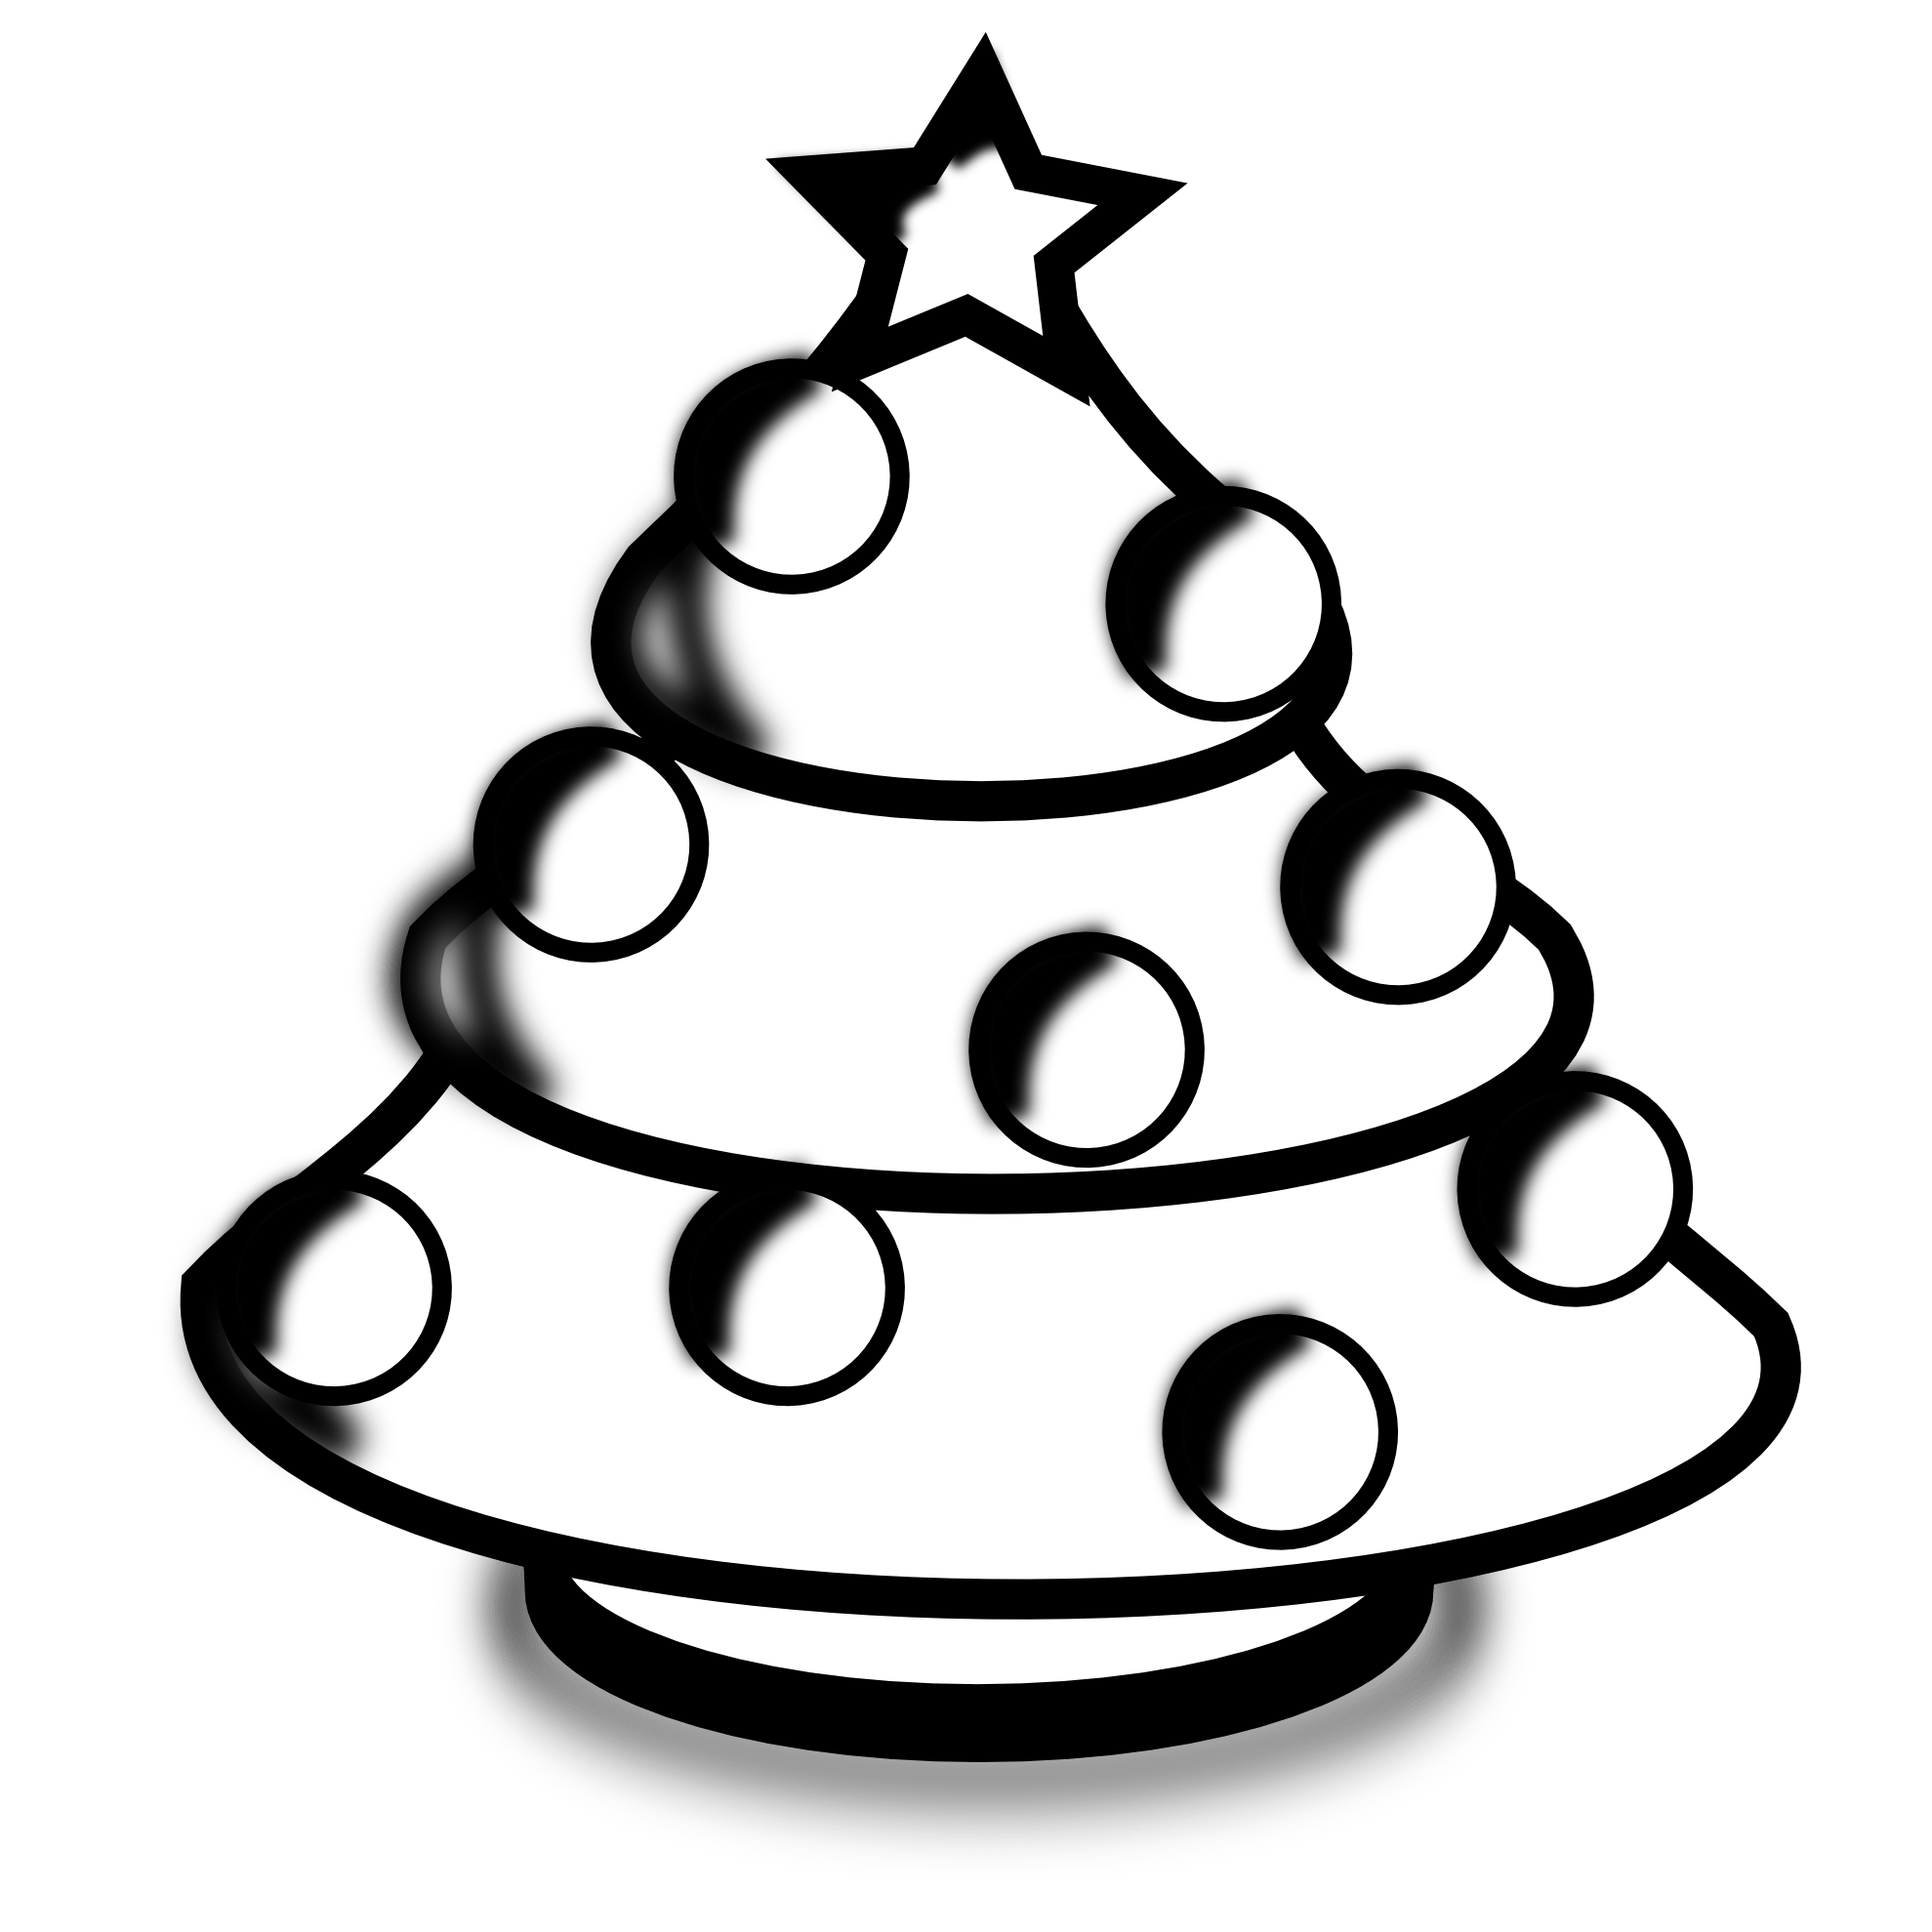 Share more than 87 black and white christmas wallpaper latest - in ...